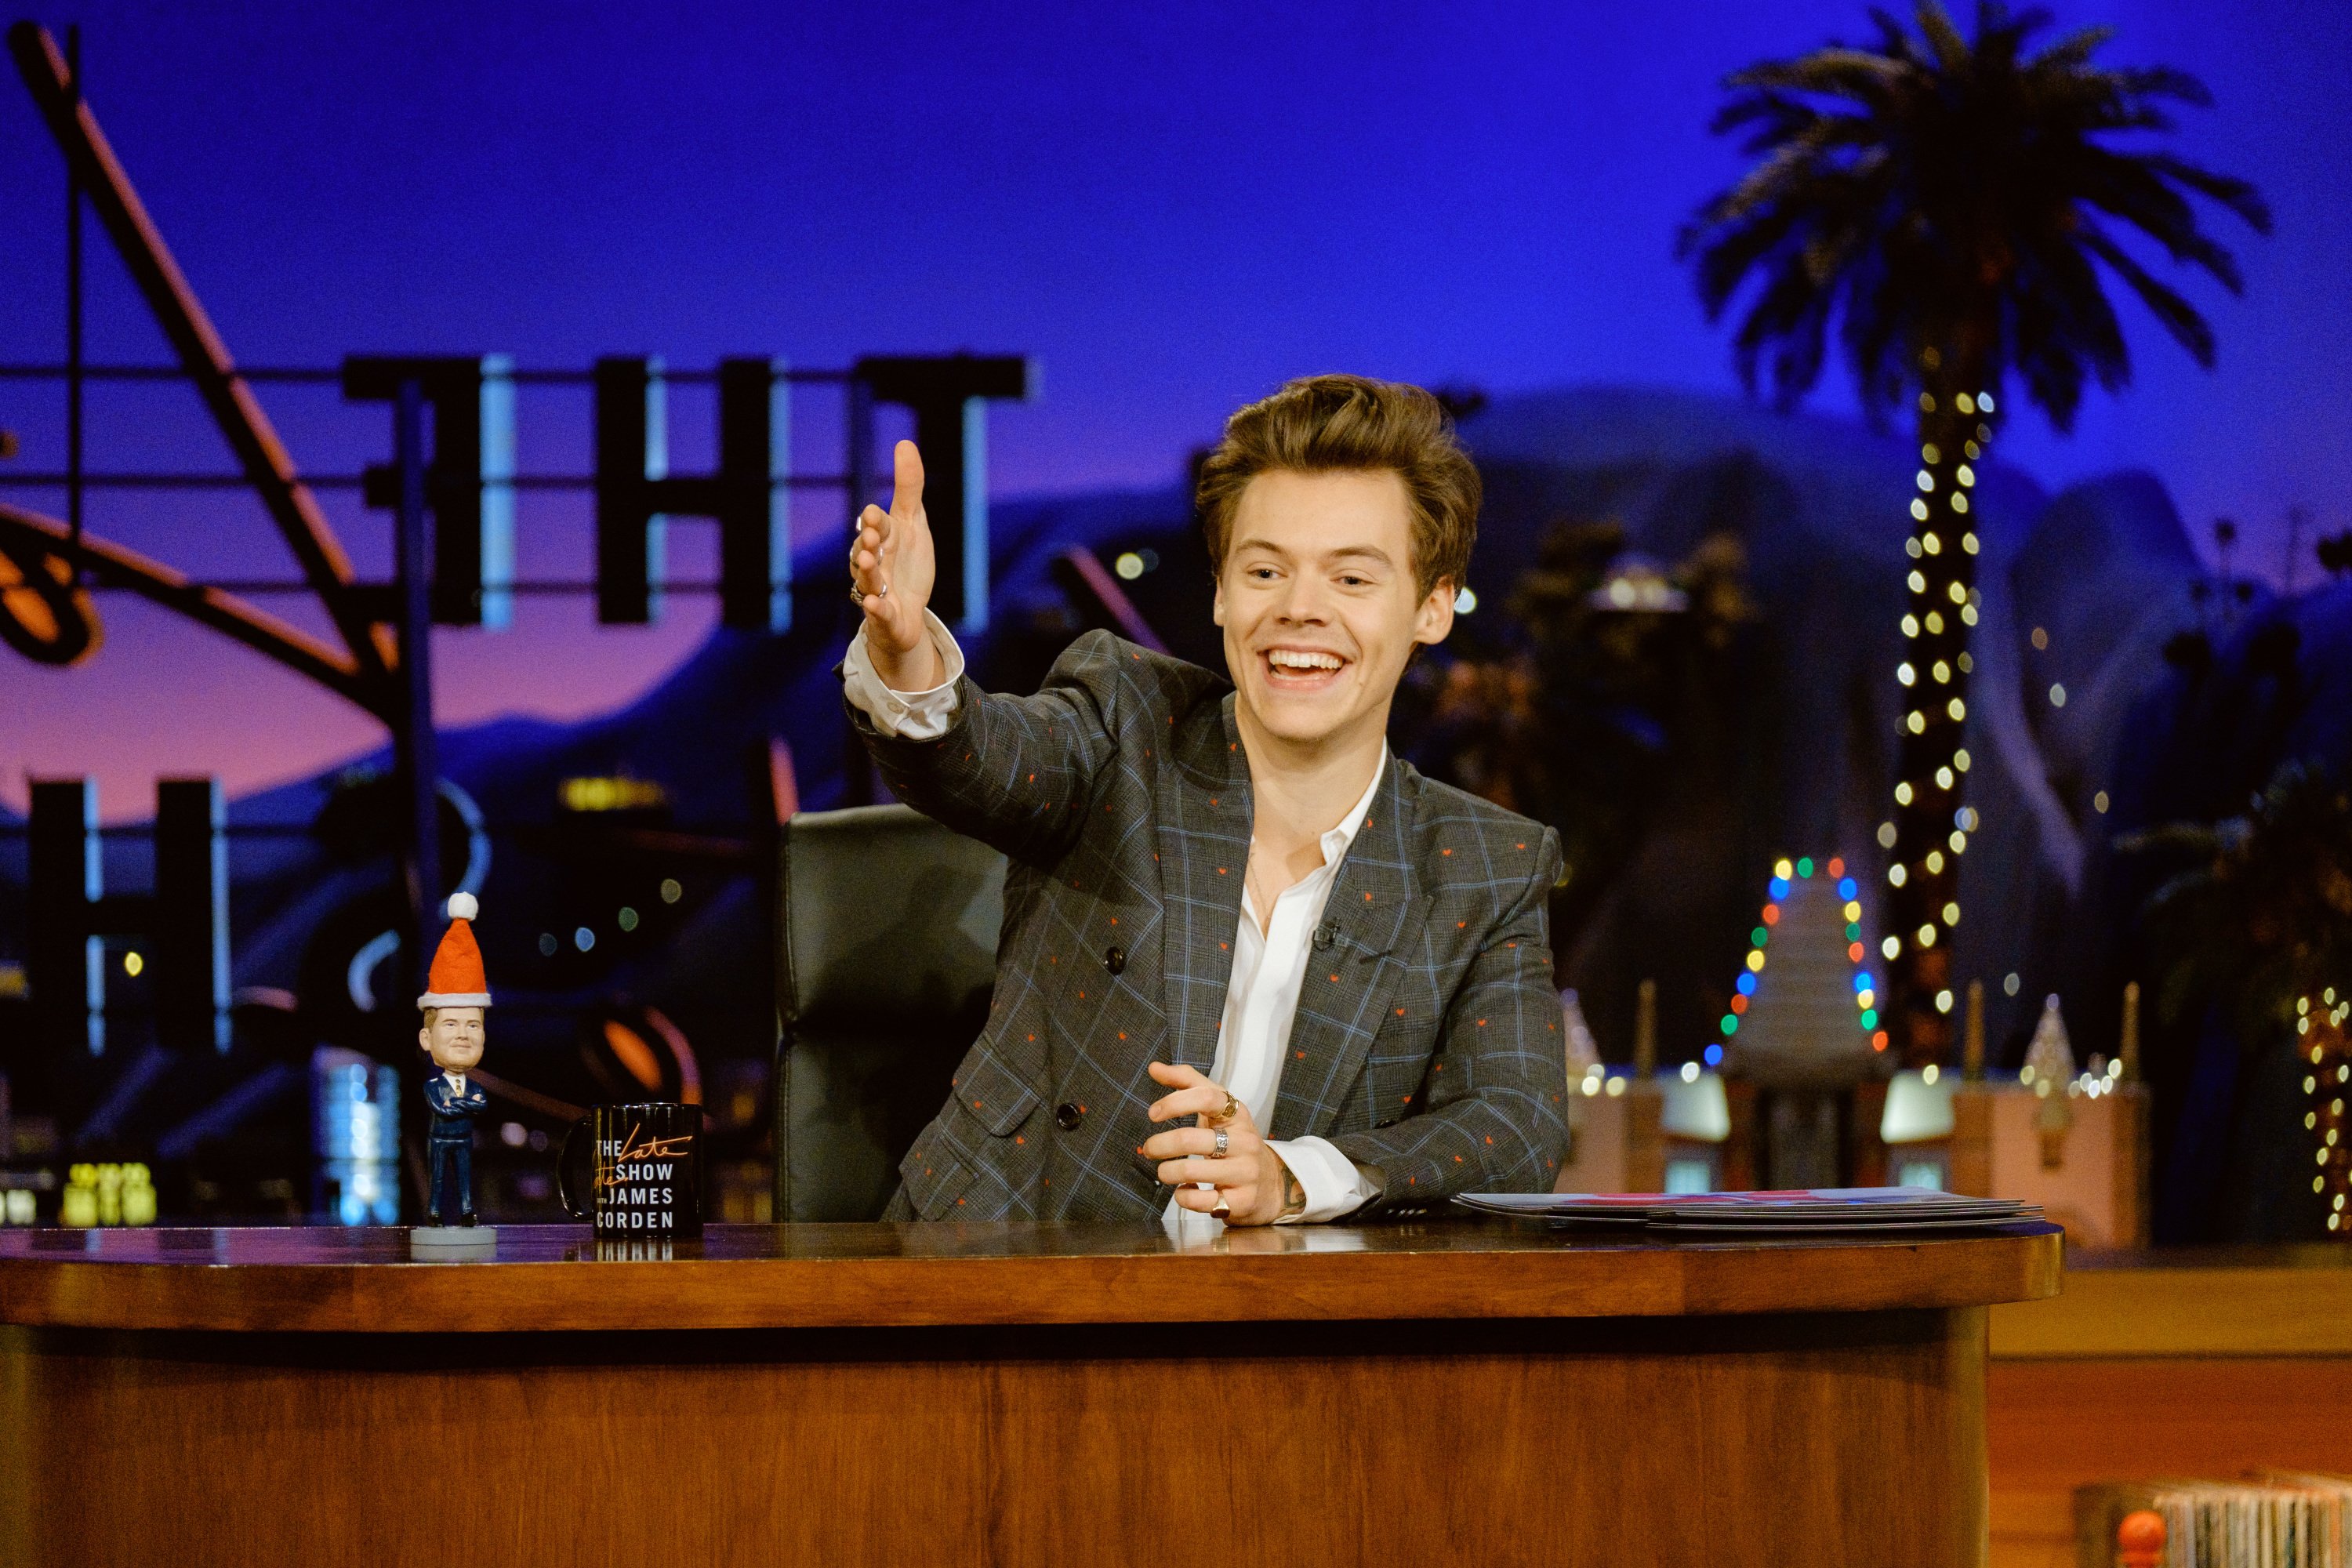 Harry Styles at a desk